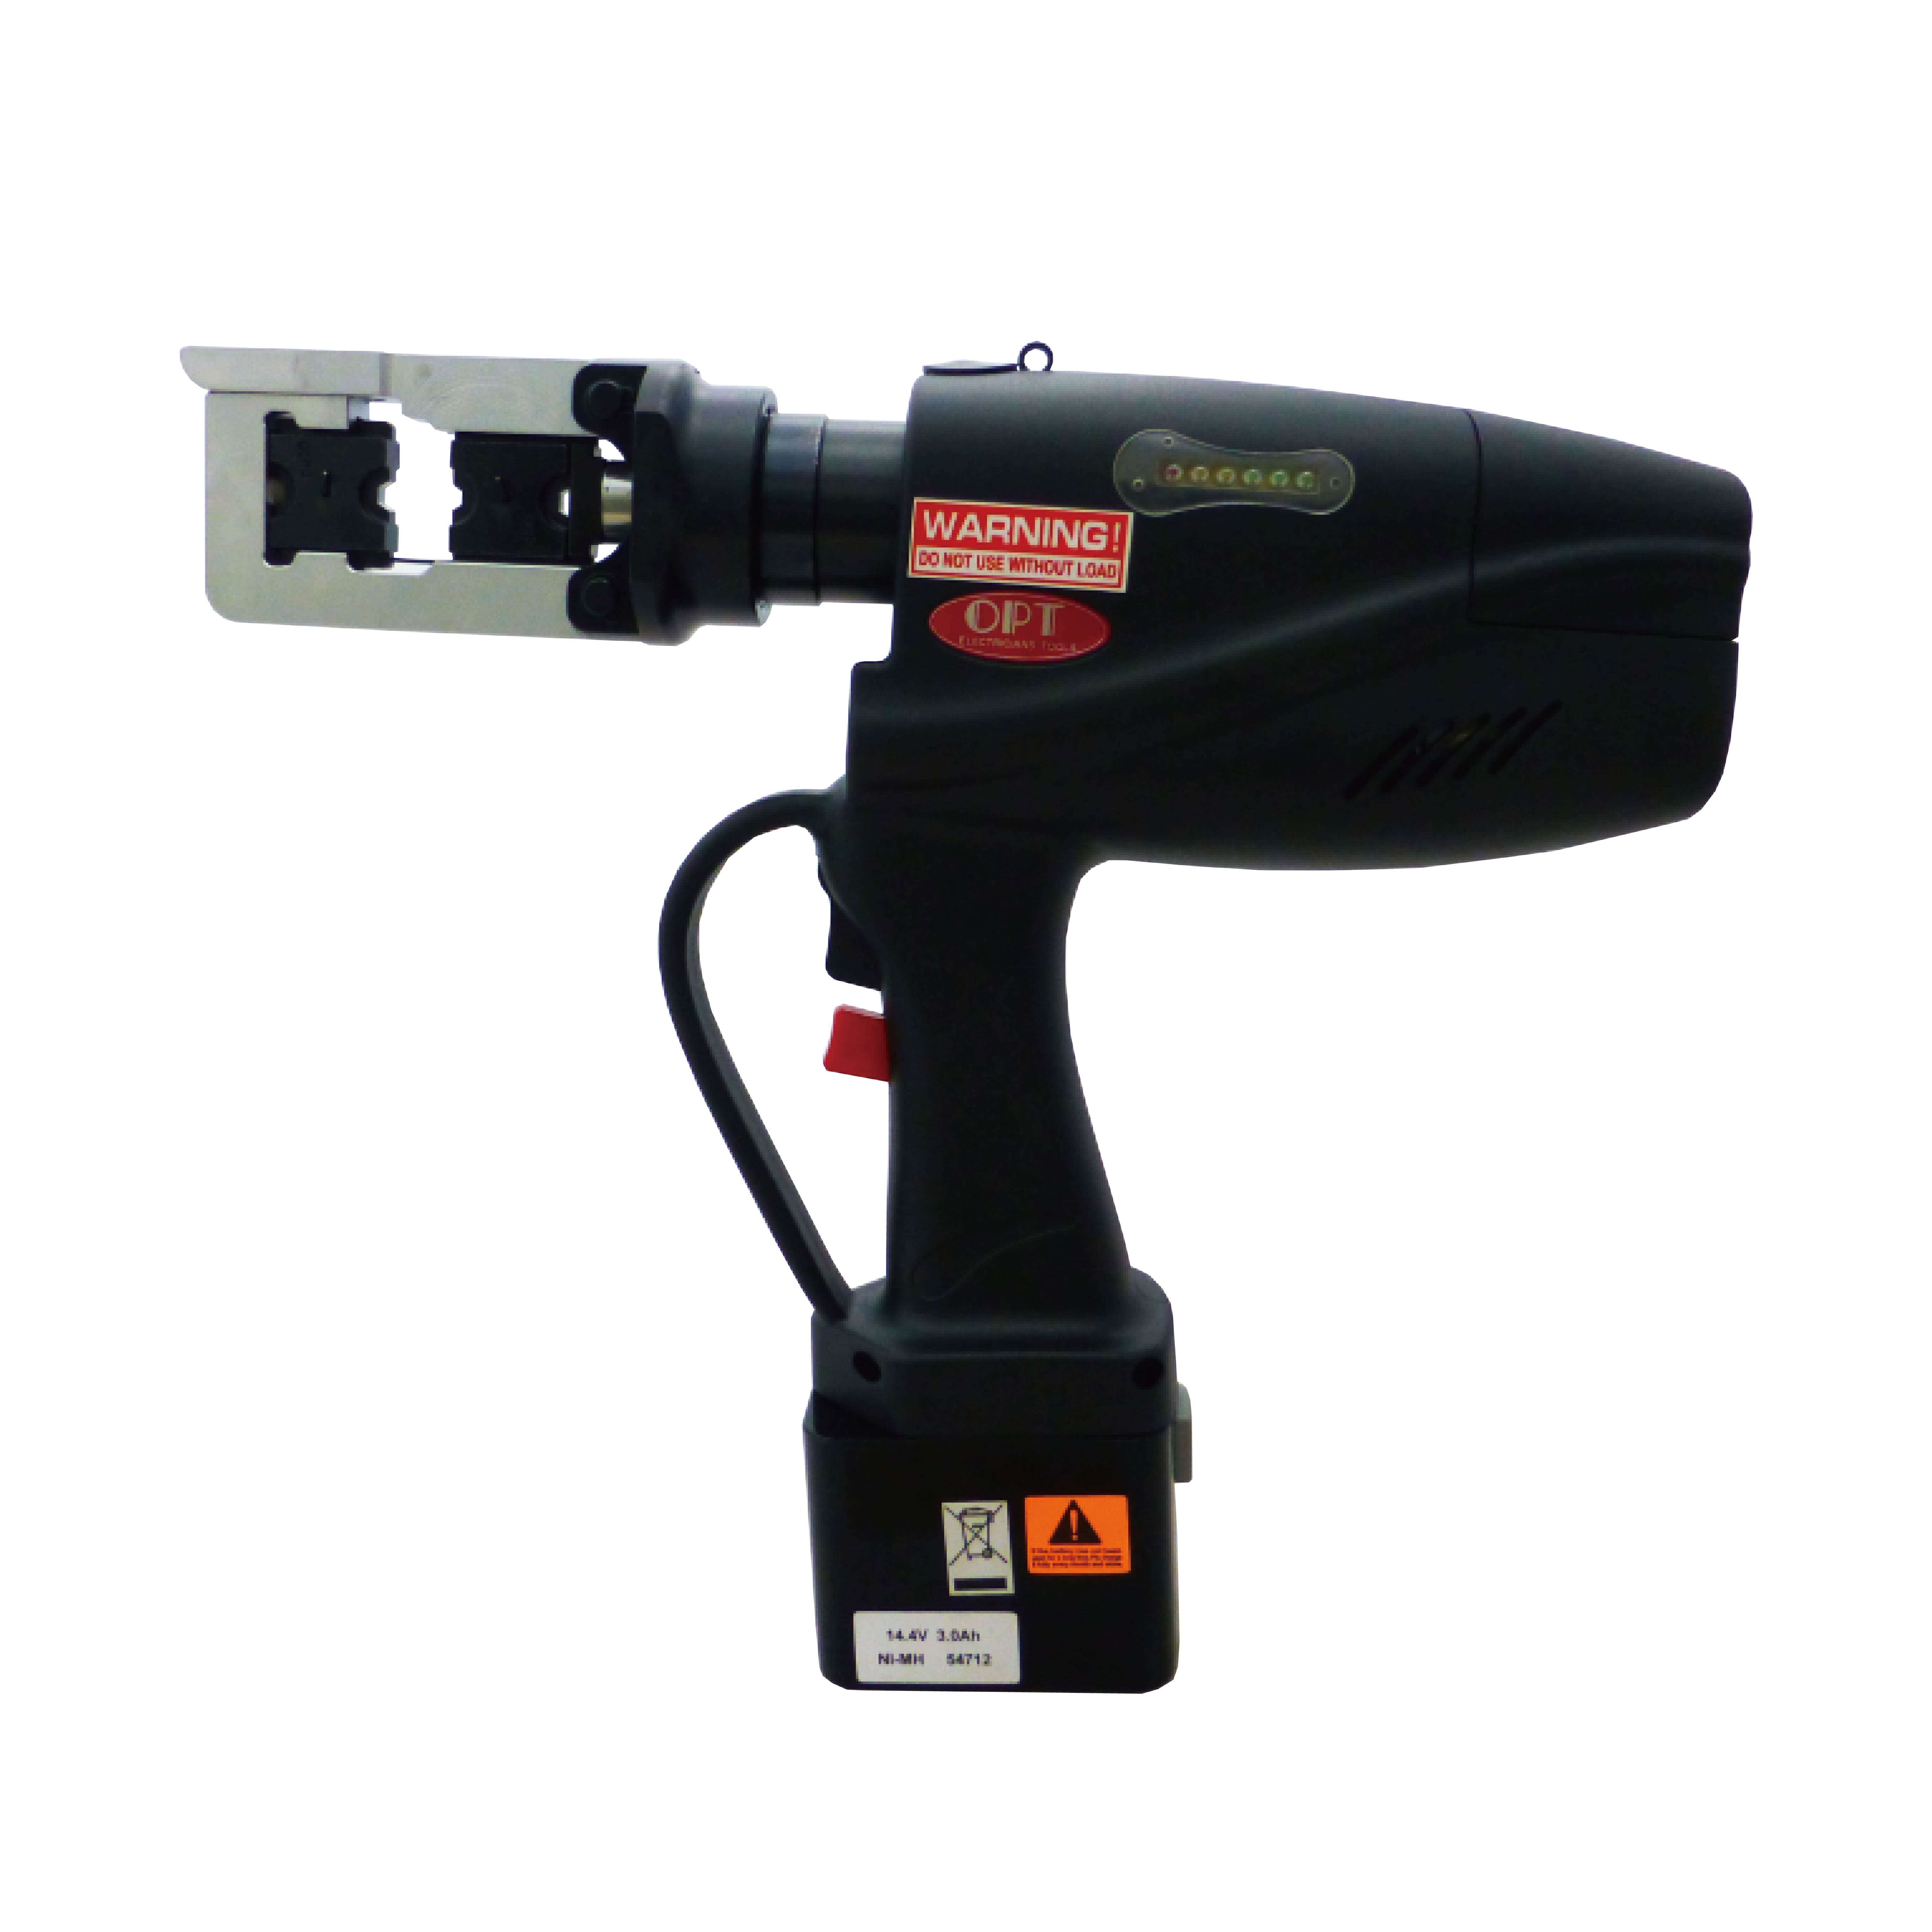 EPL-240 CORDLESS HYDRAULIC CRIMPING TOOLS-EPL-240